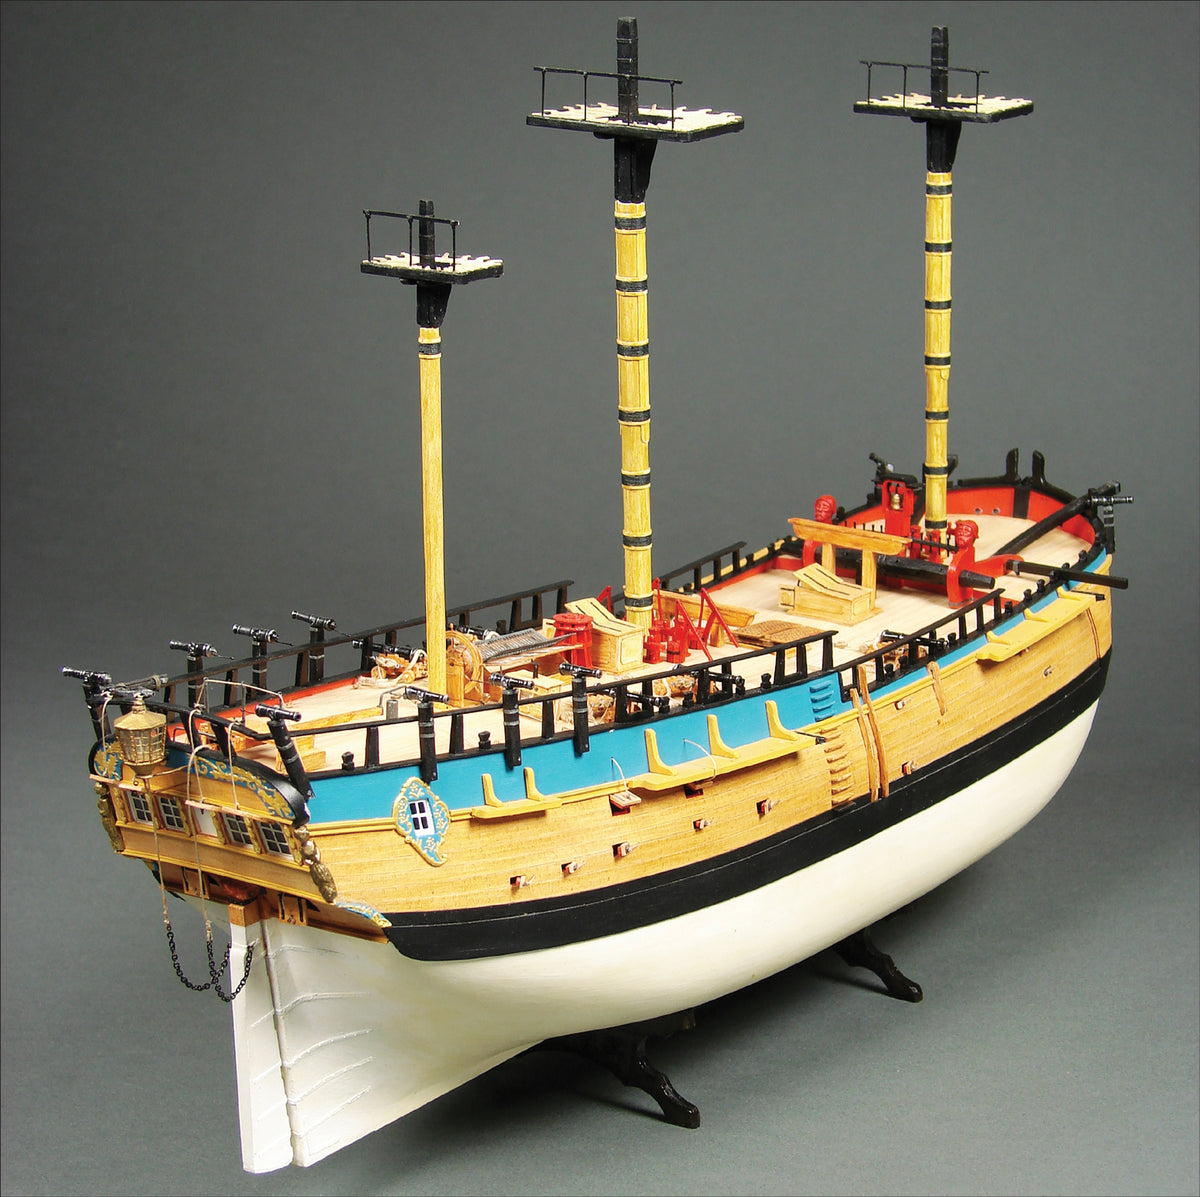 Image of HM Bark Endeavour 1:96 scale card model kit from Shipyard, showcasing detailed laser-cut parts and the intricate design of Captain Cook's historic ship.